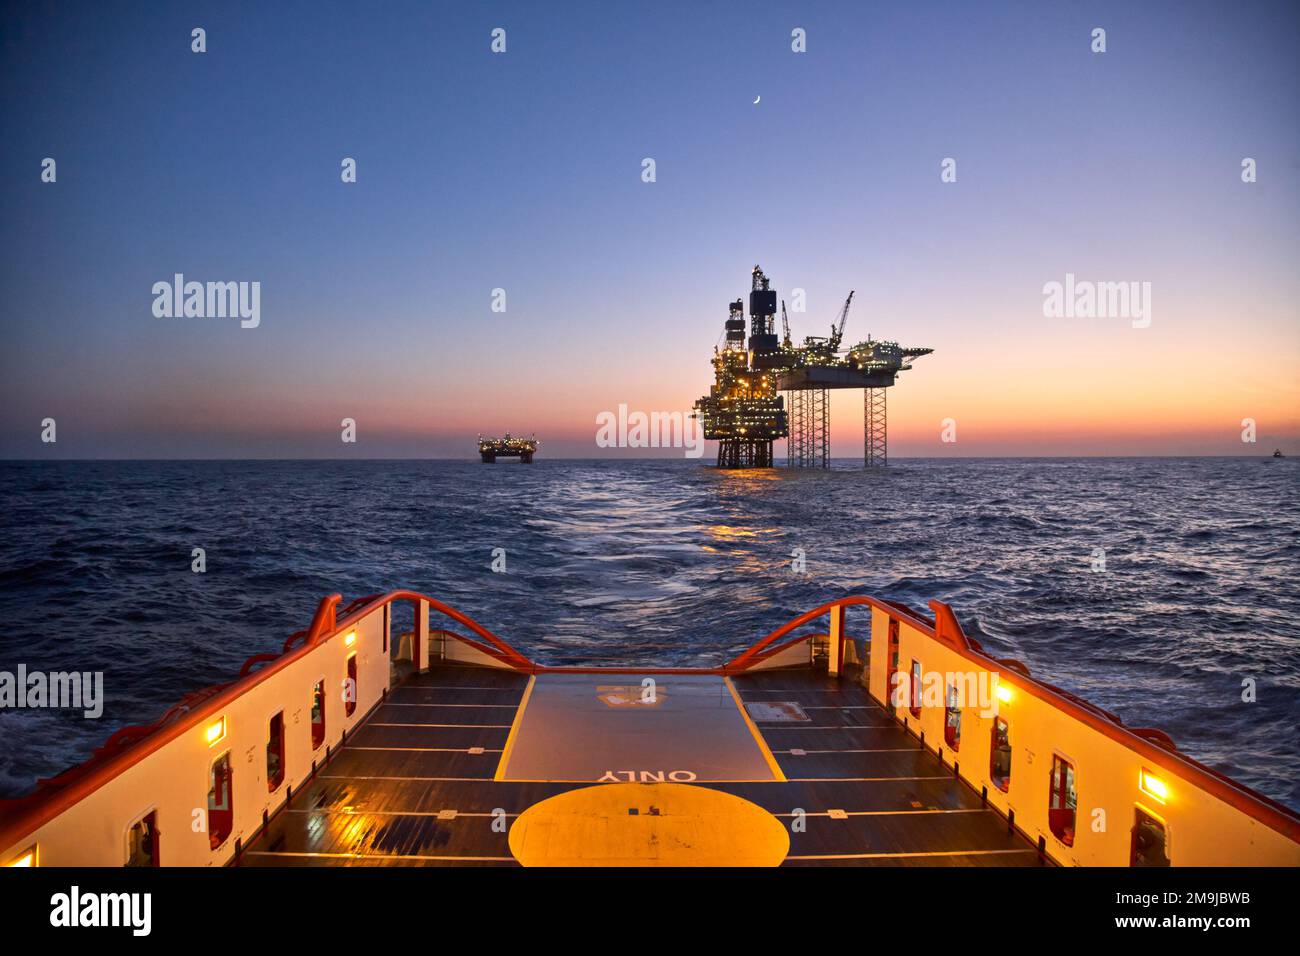 Anchor handing vessel  in the sea during cargo operations for offshore oil production platform. Stock Photo